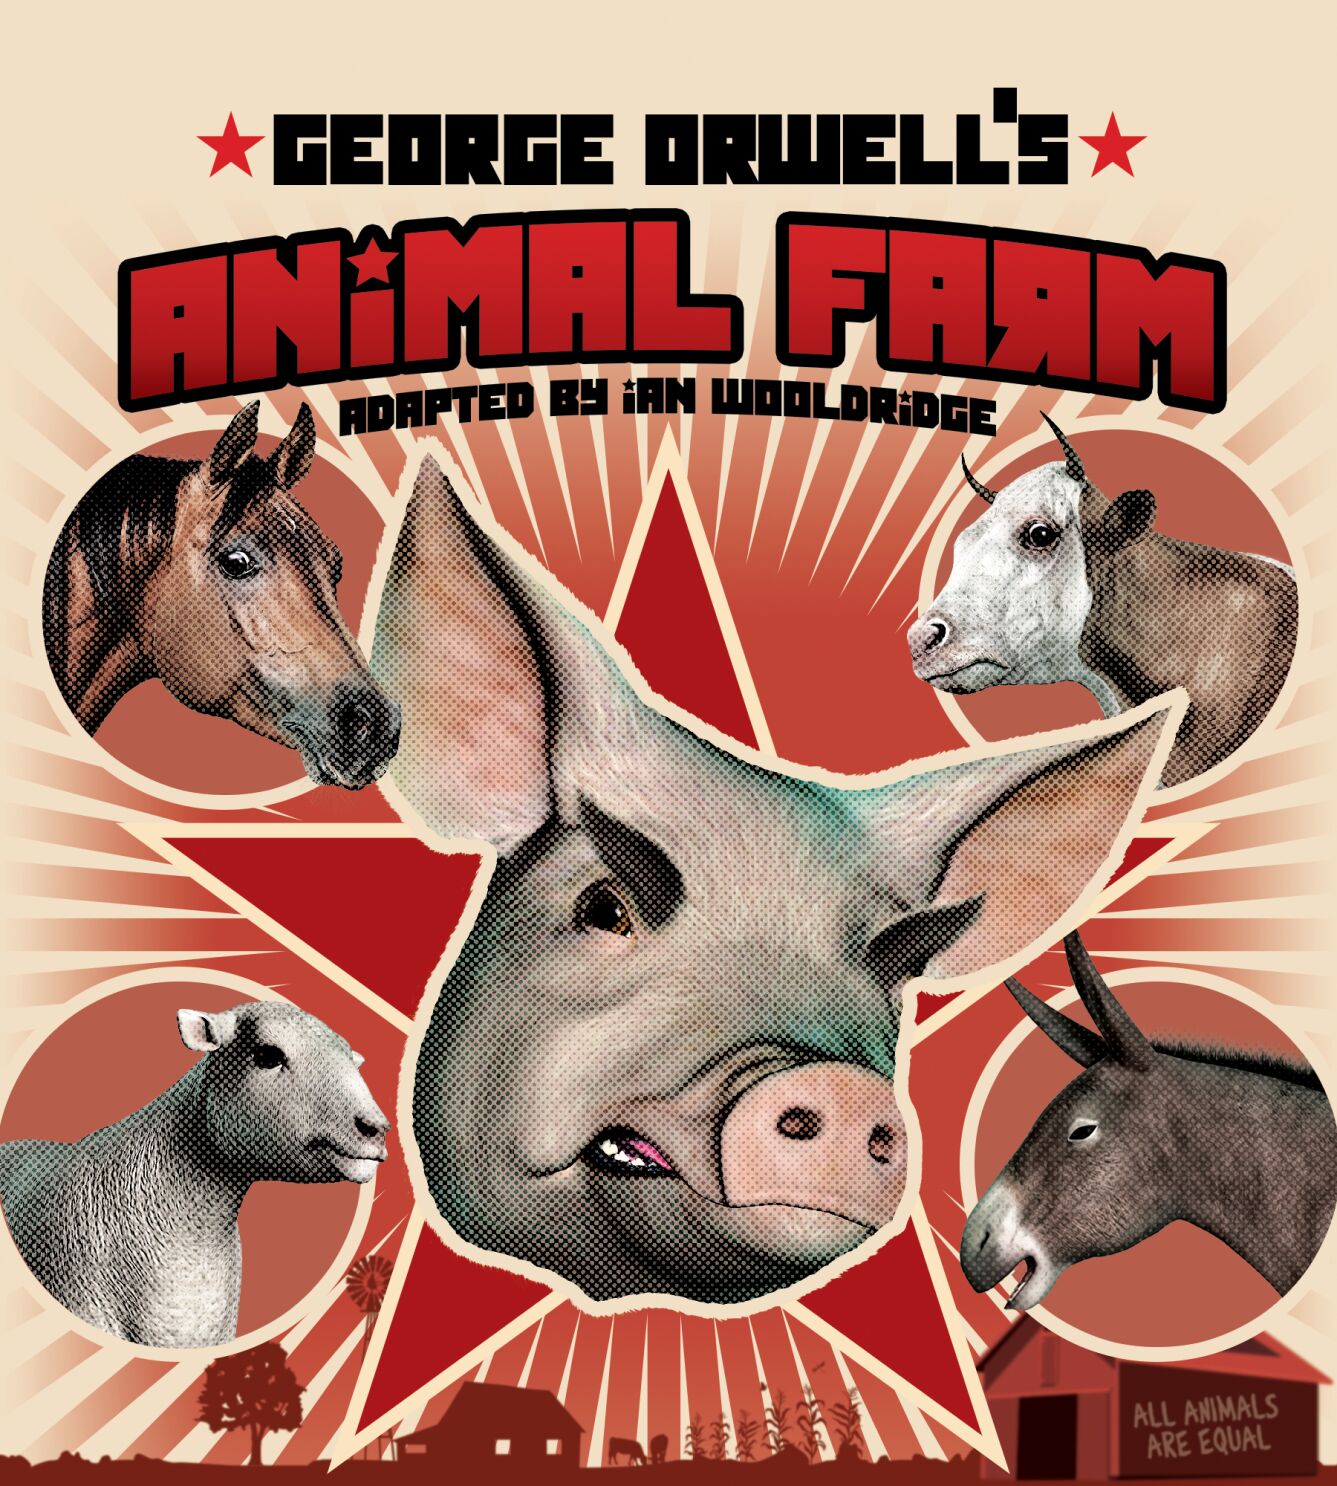 Theatre School @ North Coast Rep to feature George Orwell's Animal Farm  with online performances - Del Mar Times